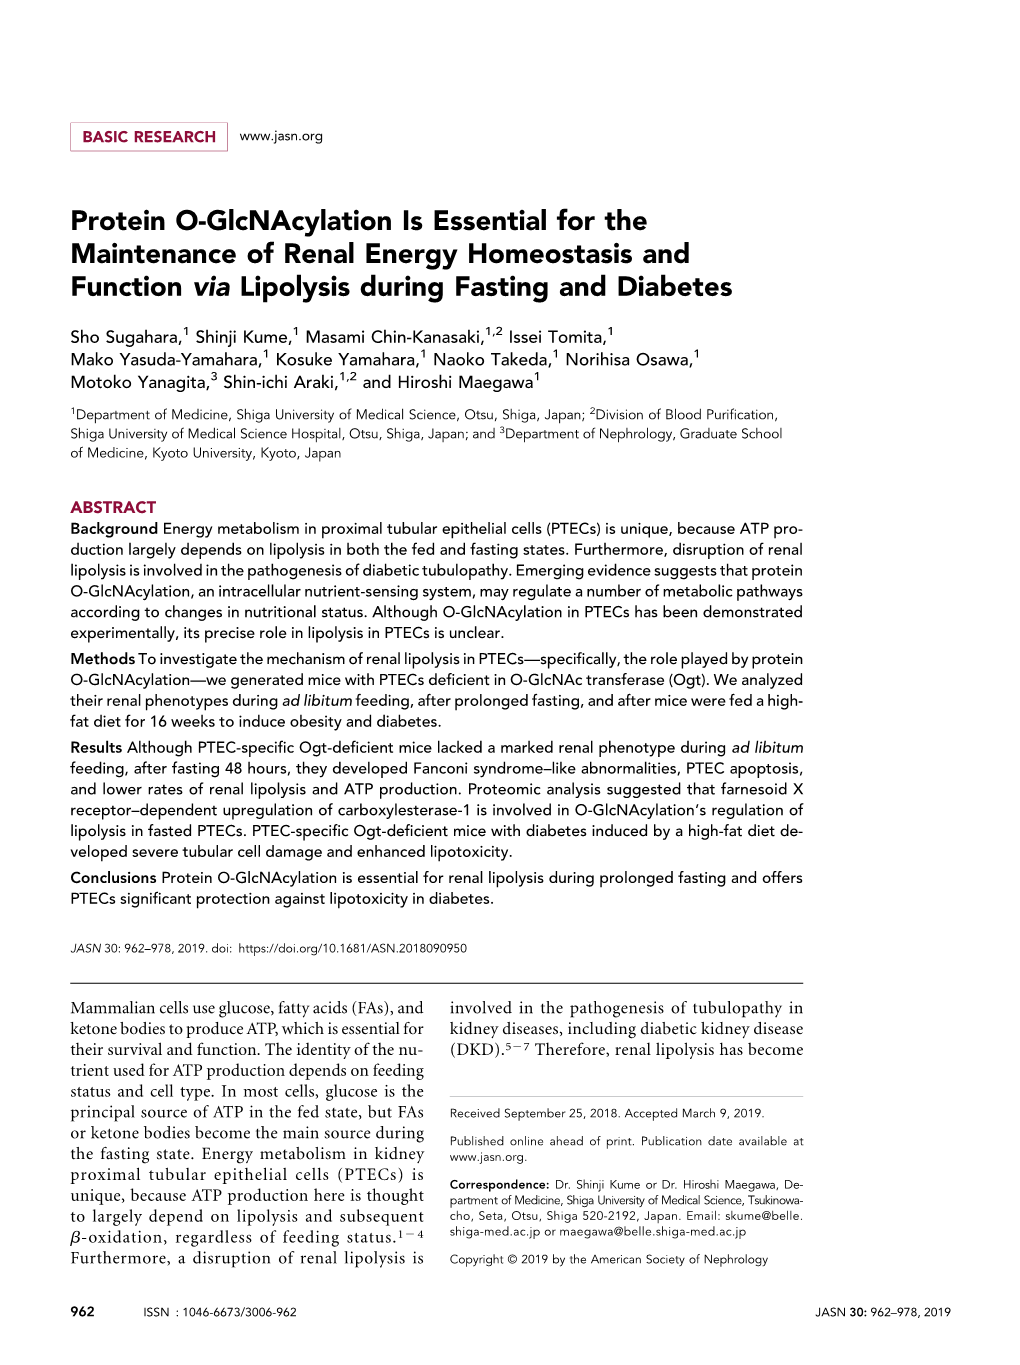 Protein O-Glcnacylation Is Essential for the Maintenance of Renal Energy Homeostasis and Function Via Lipolysis During Fasting and Diabetes